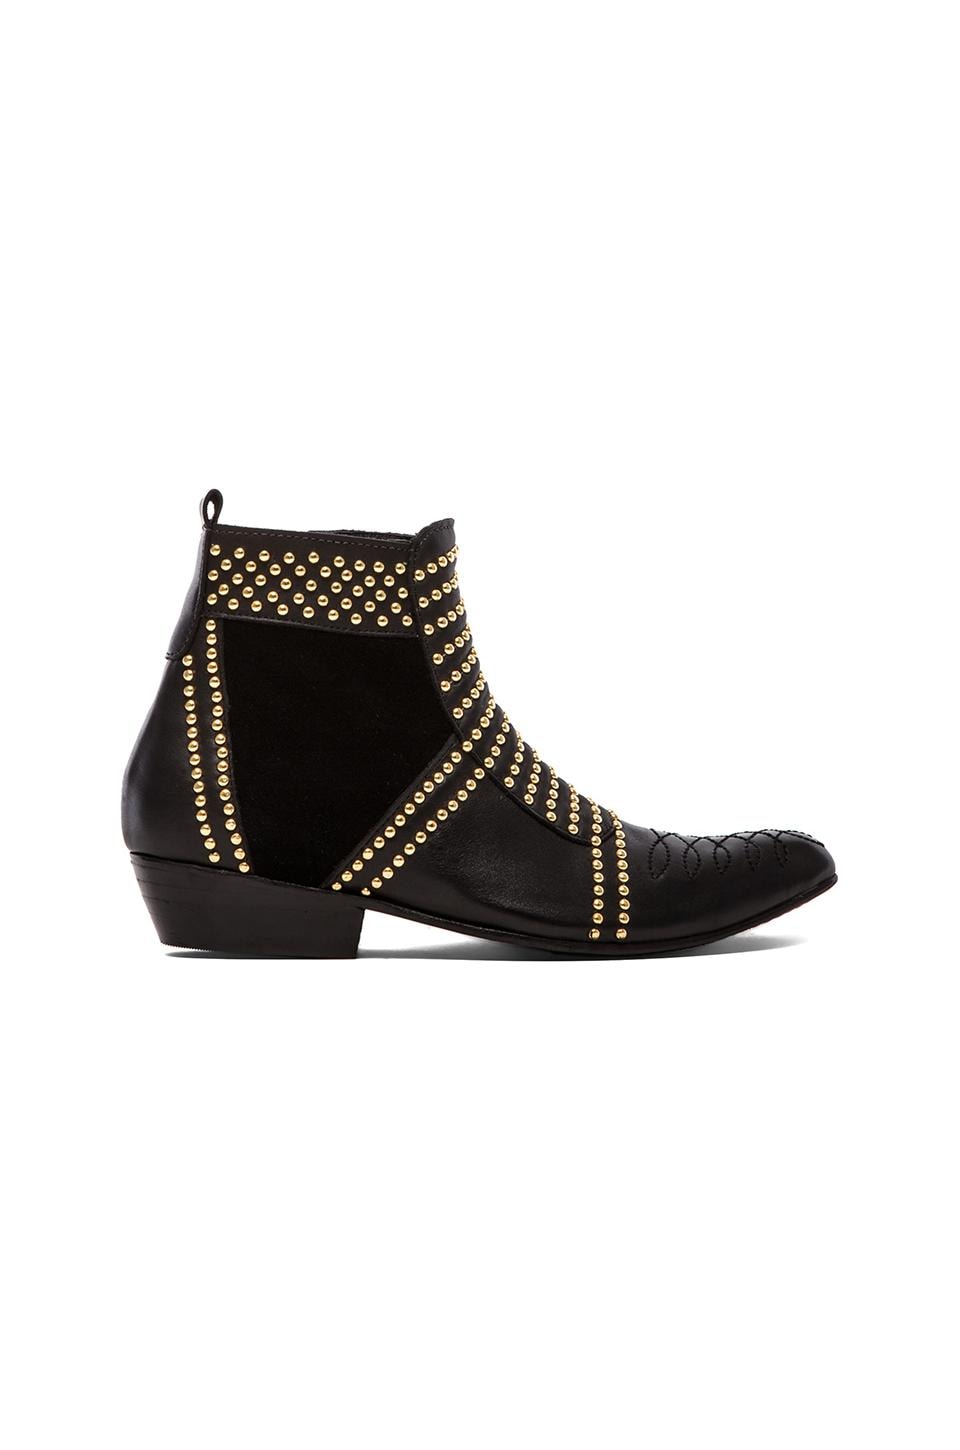 ANINE BING Boots with Studs in Black & Gold | REVOLVE